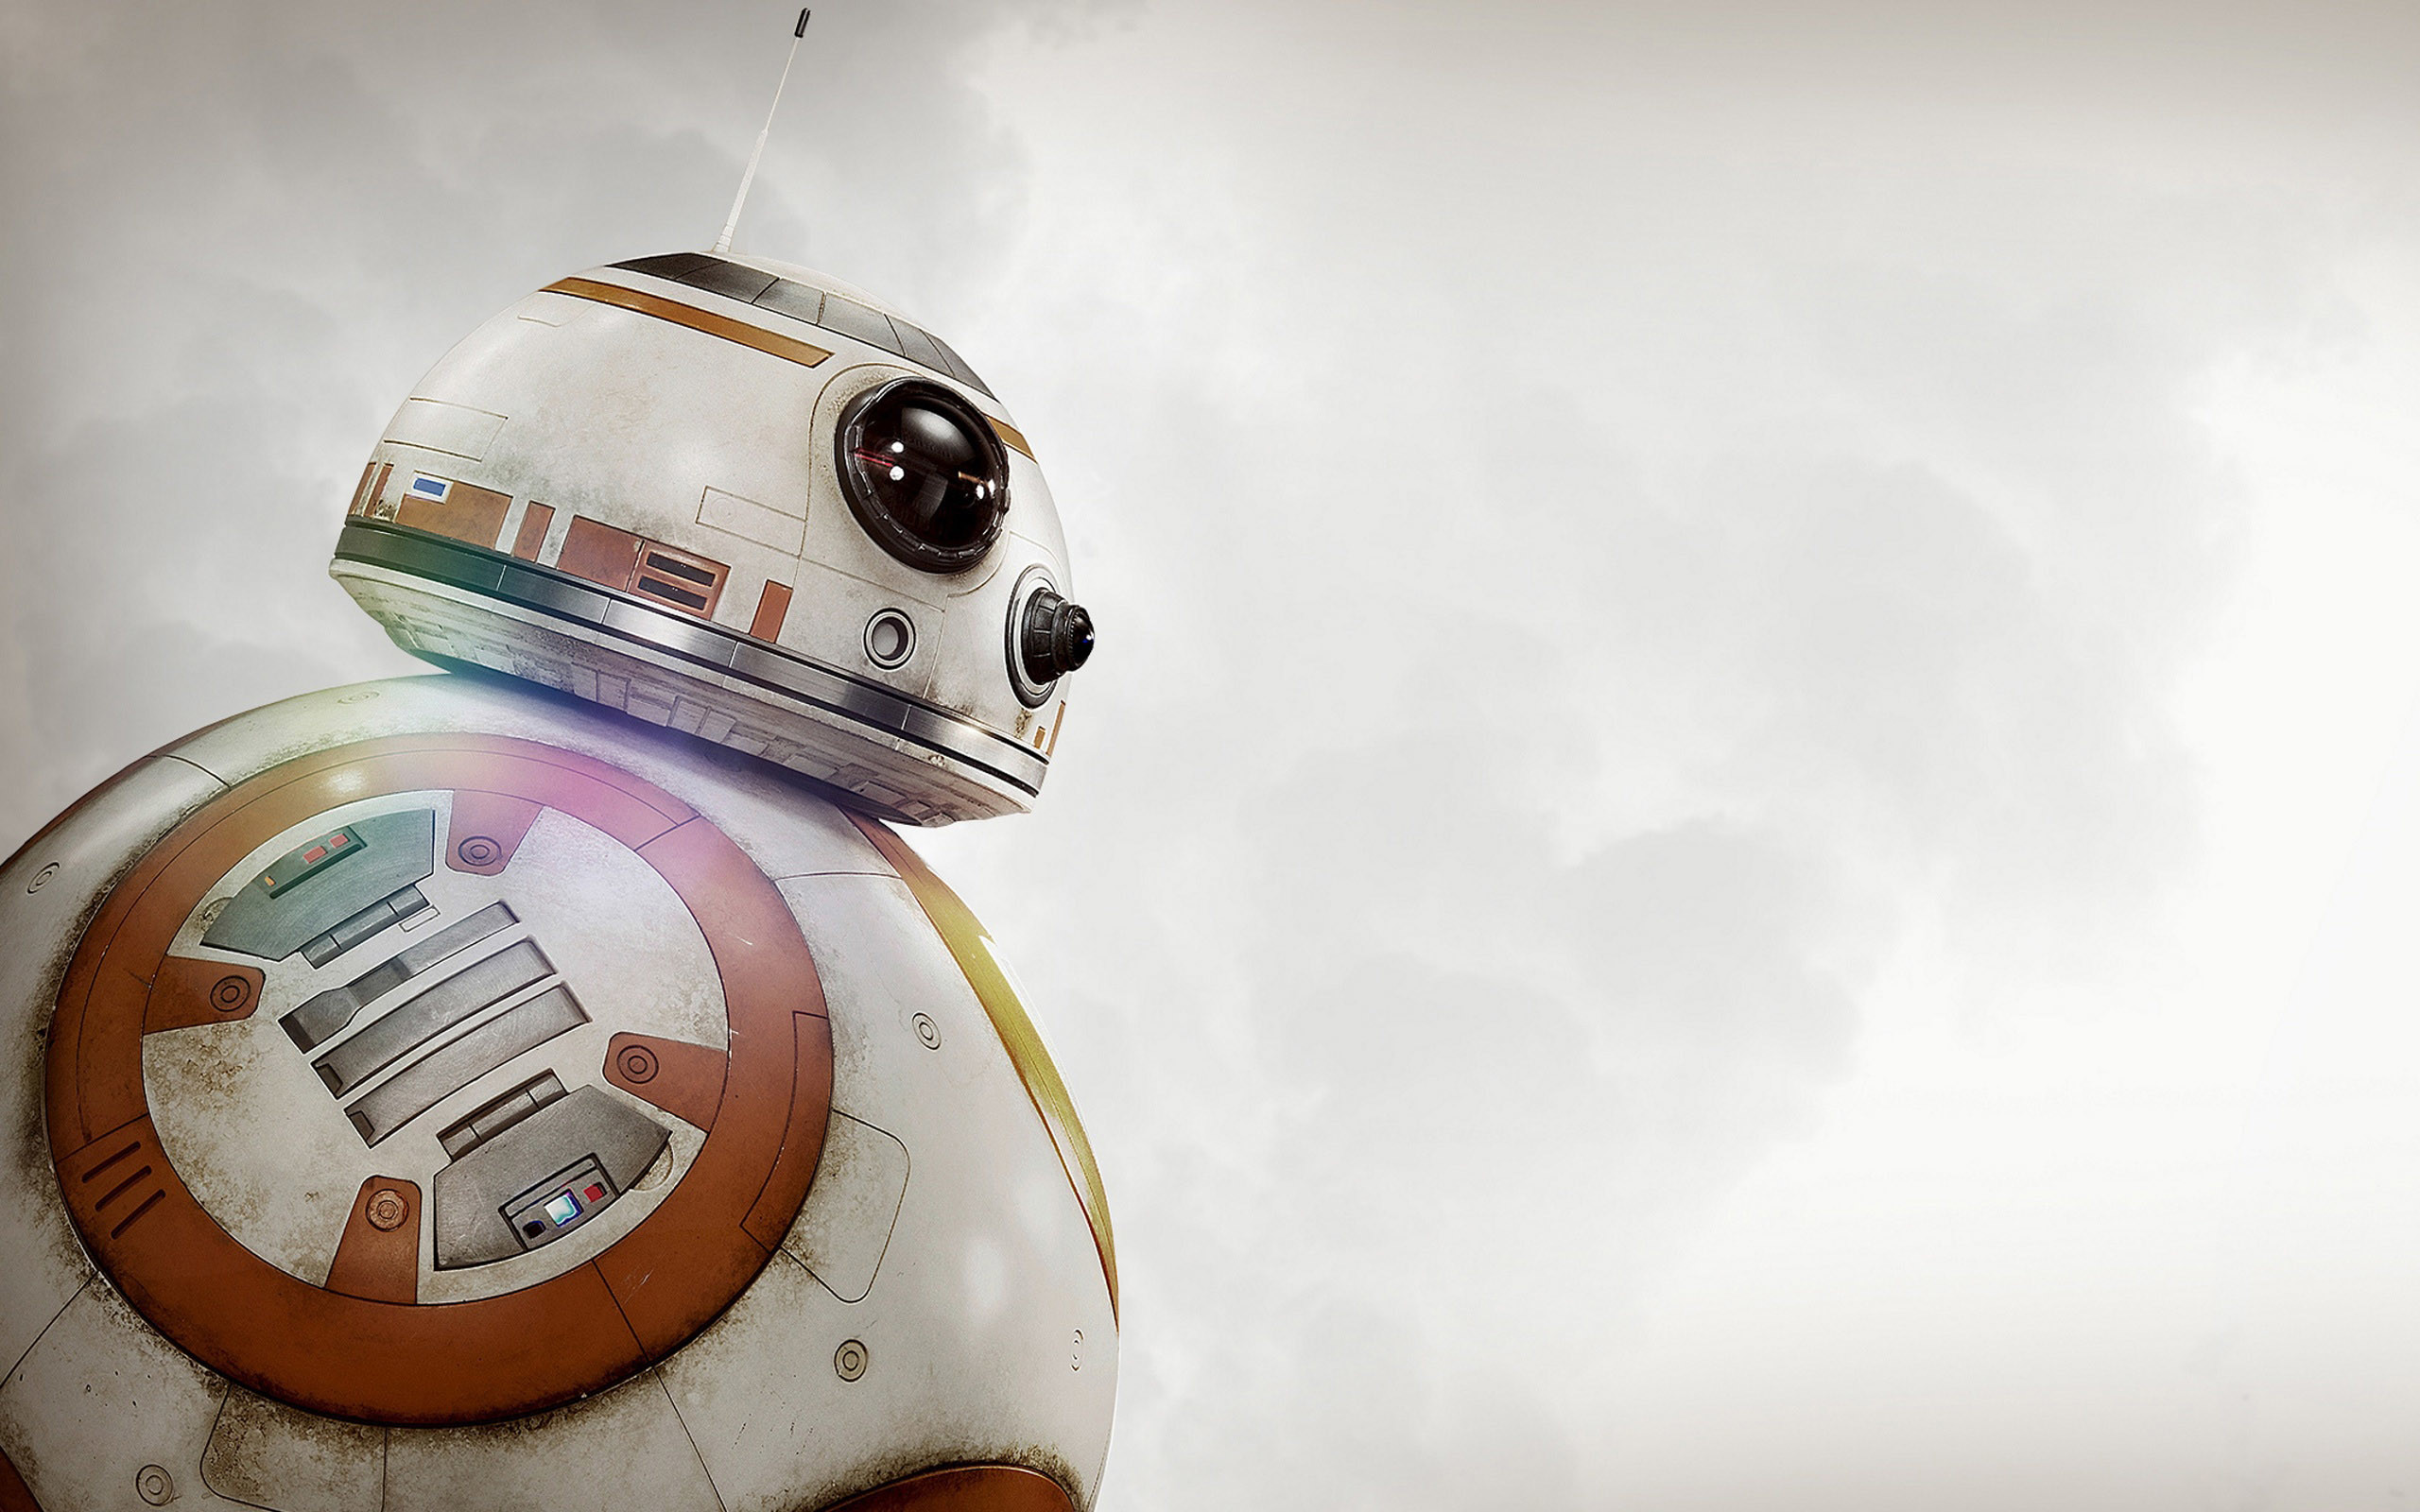 2560x1600 Star Wars The Force Awakens Wallpapers Photo